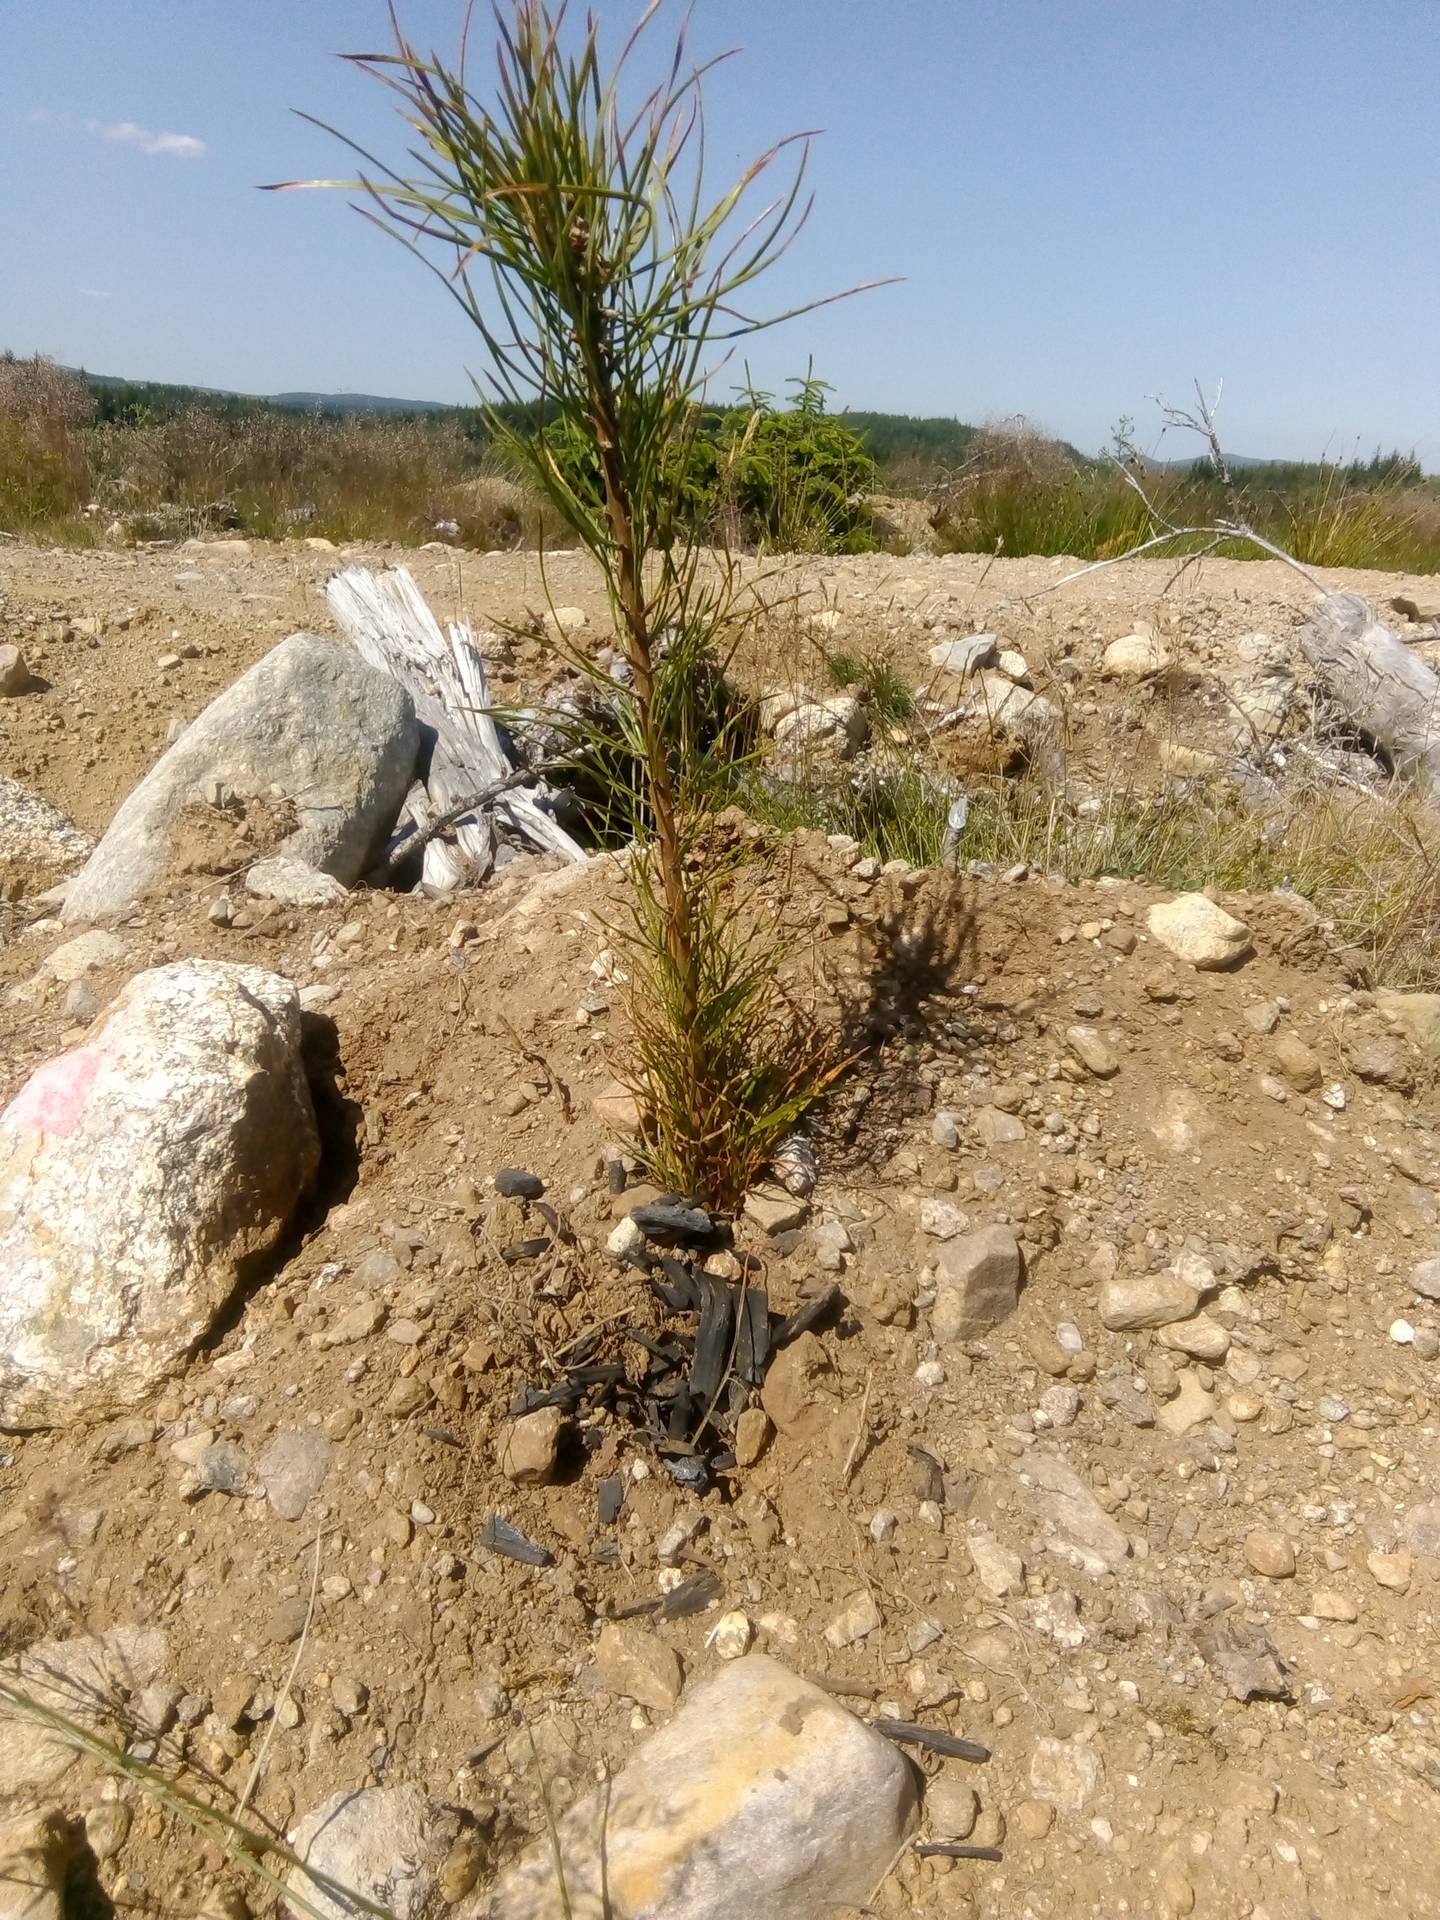 A pine tree that has been treated with biochar, which can improve soil nutrient content and water retention. Photo: Black Bull Biochar.